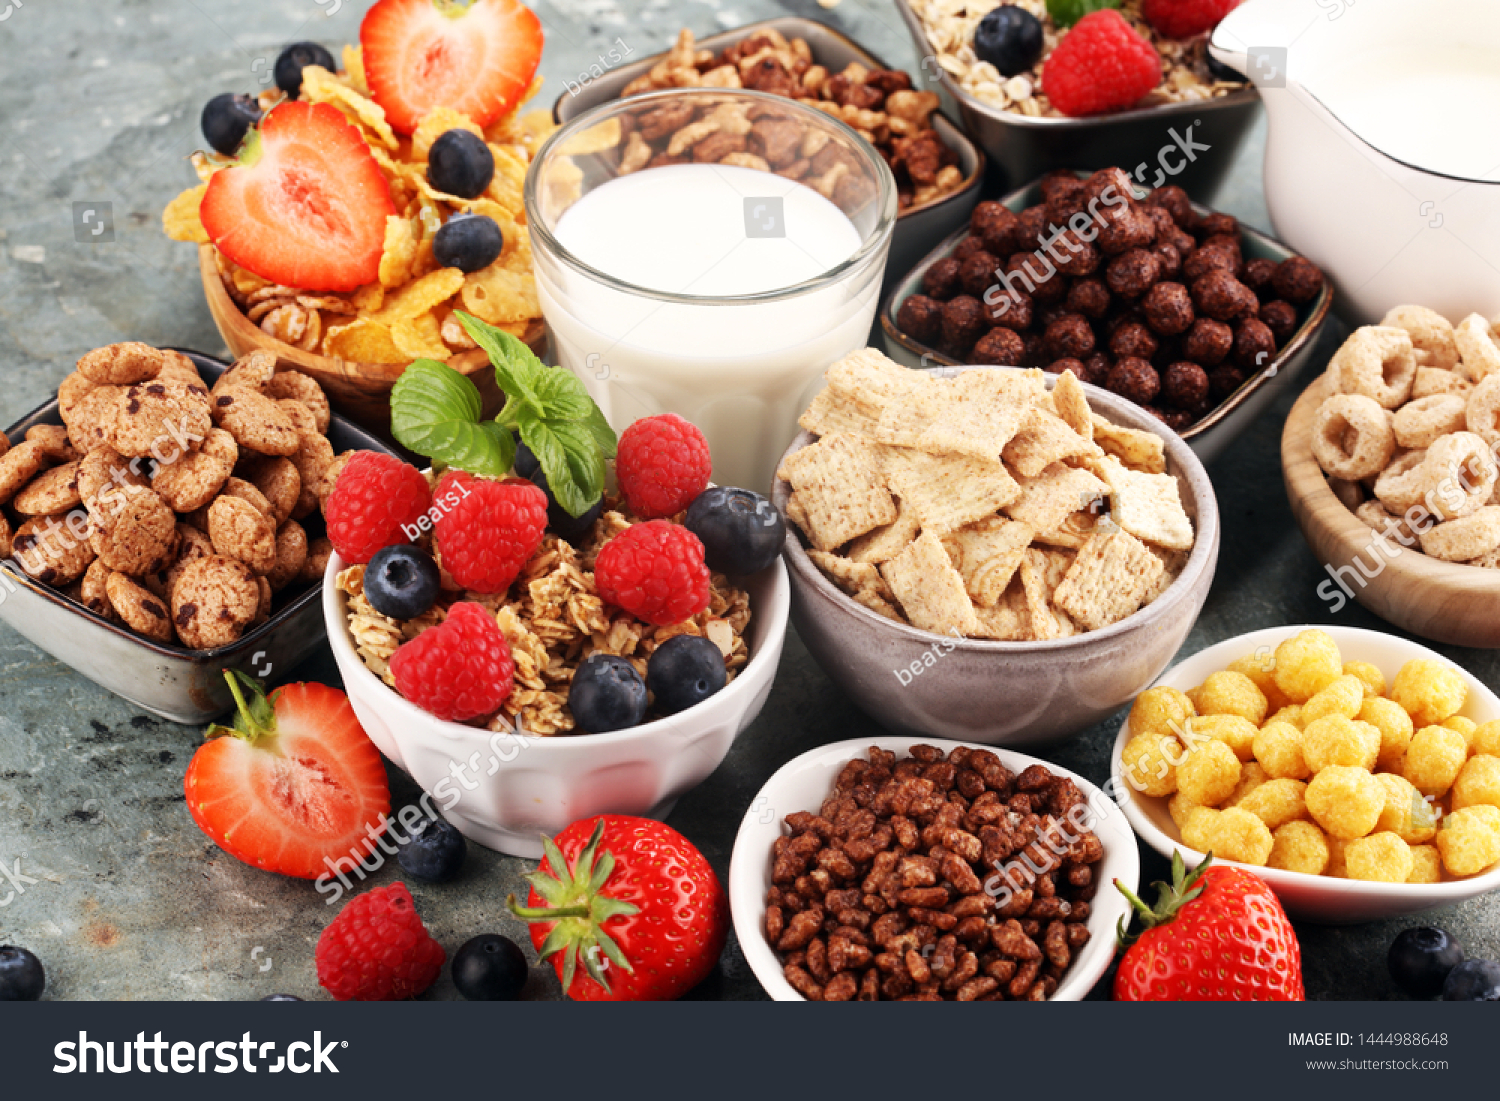 Cereal. Bowls of various cereals, fruits and milk for breakfast. Muesli with variety of kids cereals. #1444988648